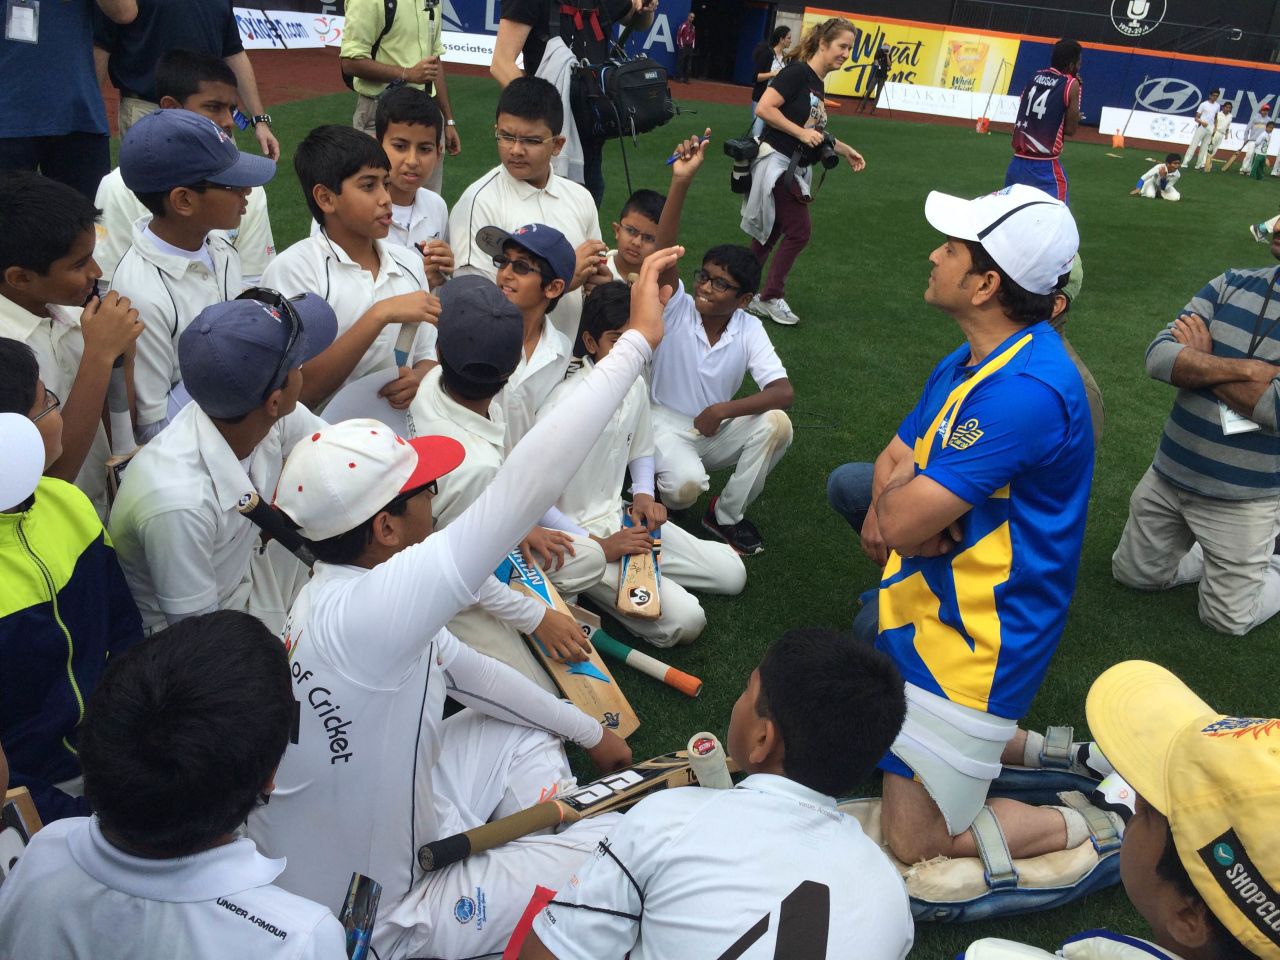 Sachin Tendulkar passes along tips to young cricketers during a clinic at Citi Field, Cricket All-Stars, Queens, New York, November 6, 2015